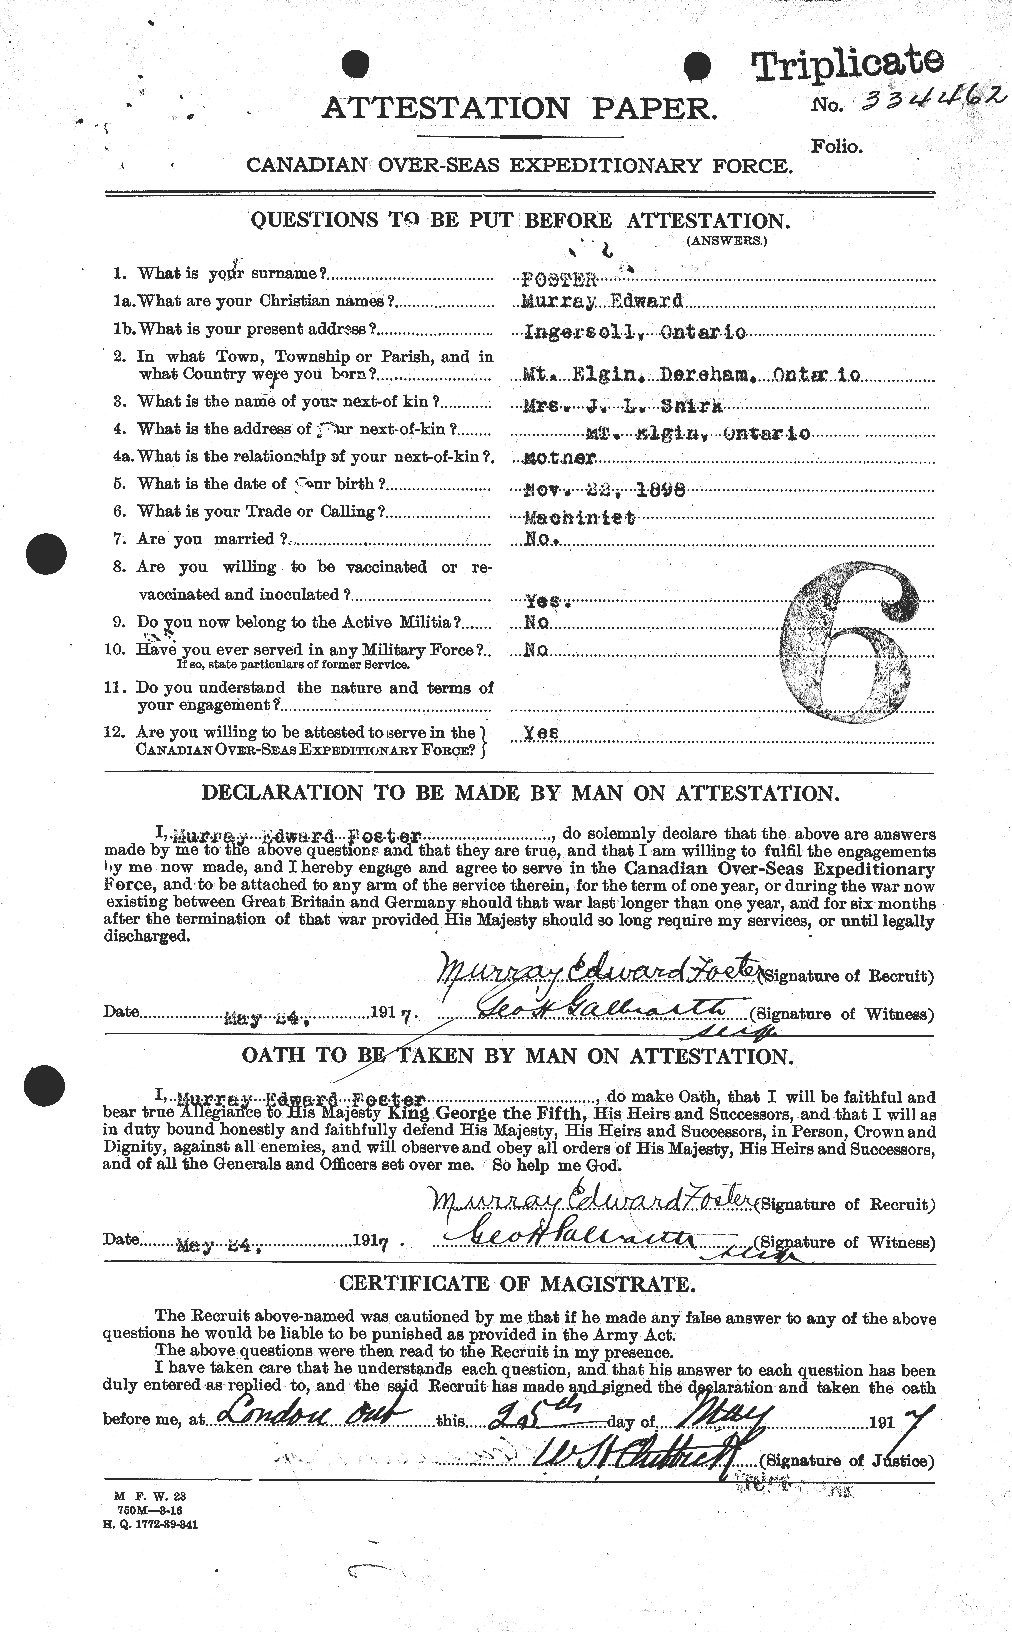 Personnel Records of the First World War - CEF 333431a